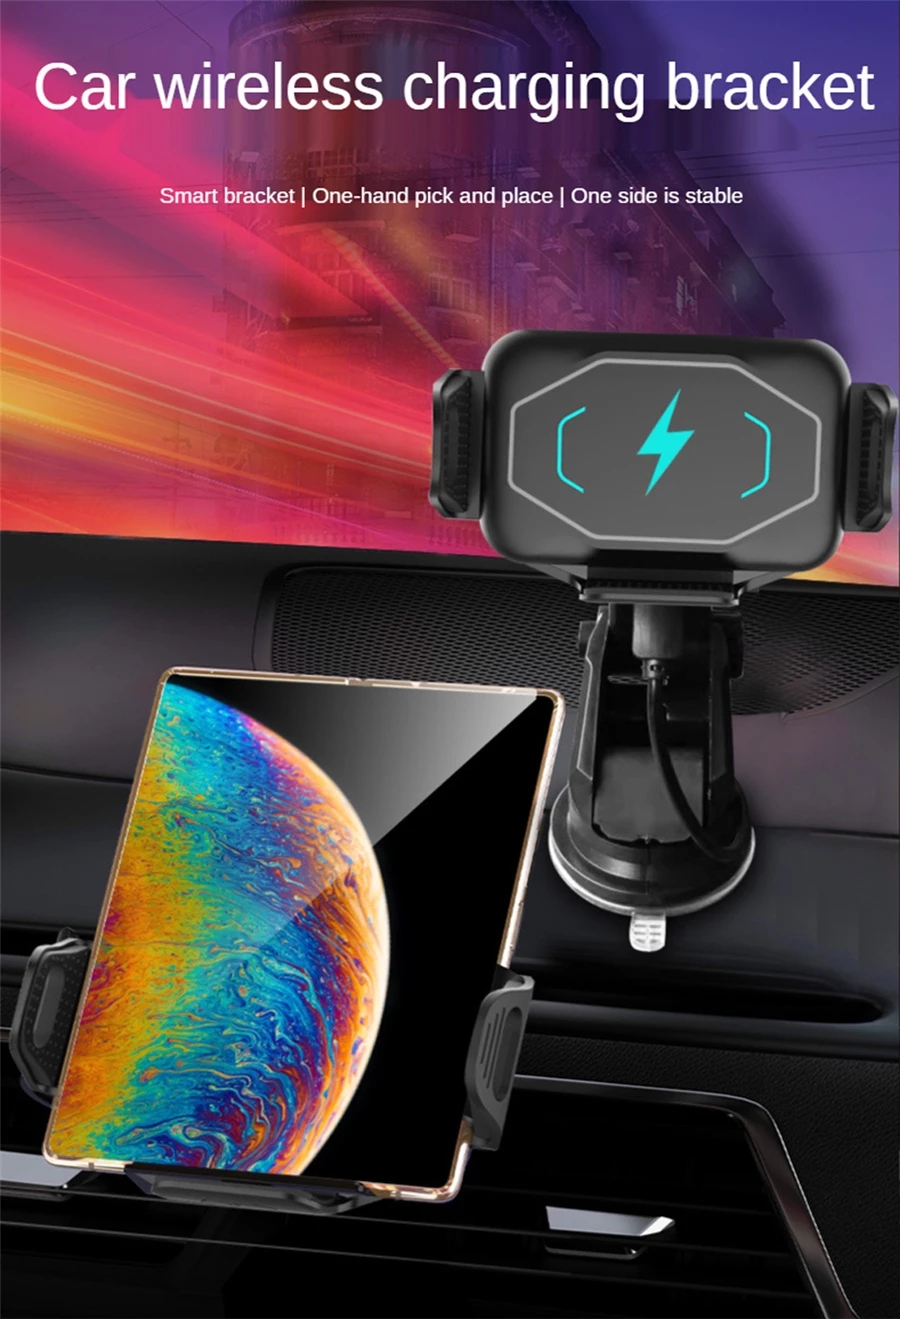 S15-15W-Qi-Fast-Wireless-Car-Charger-Dashboard-Mount-Smart-Sensor-Automatic-Clamping-Phone-Holder-Br-1919459-1